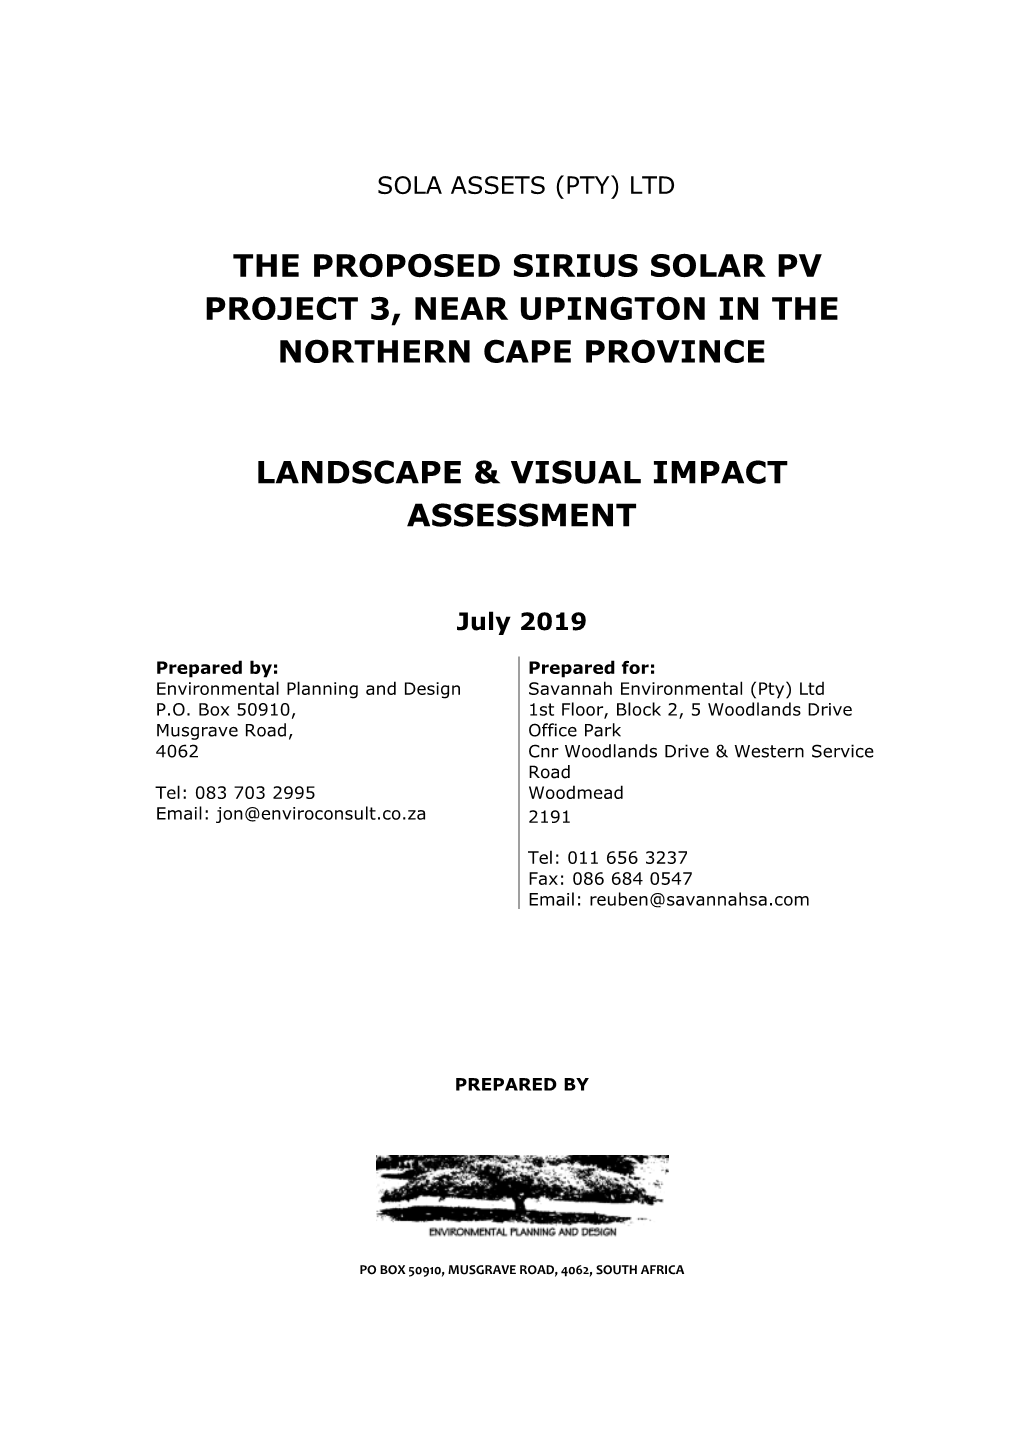 The Proposed Sirius Solar Pv Project 3, Near Upington in the Northern Cape Province